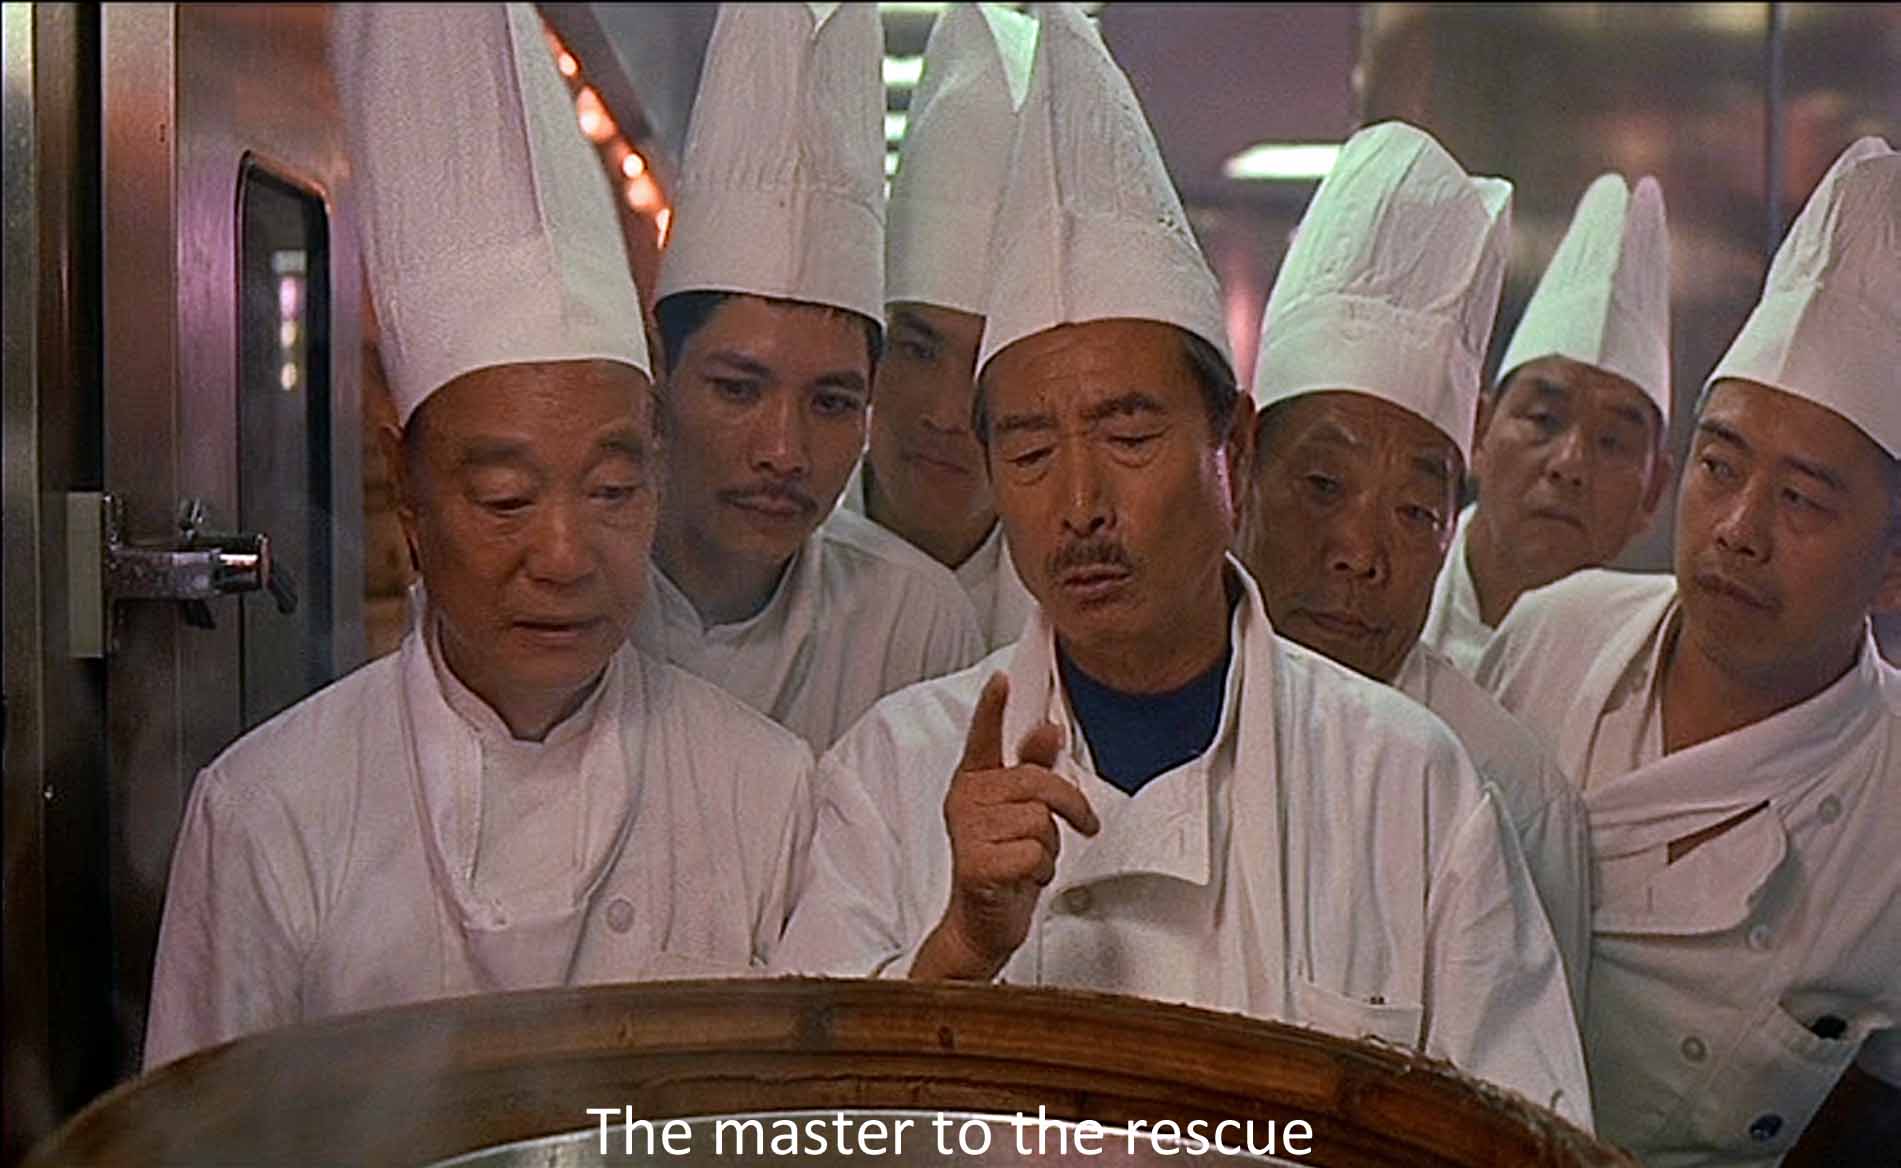 The master to the rescue